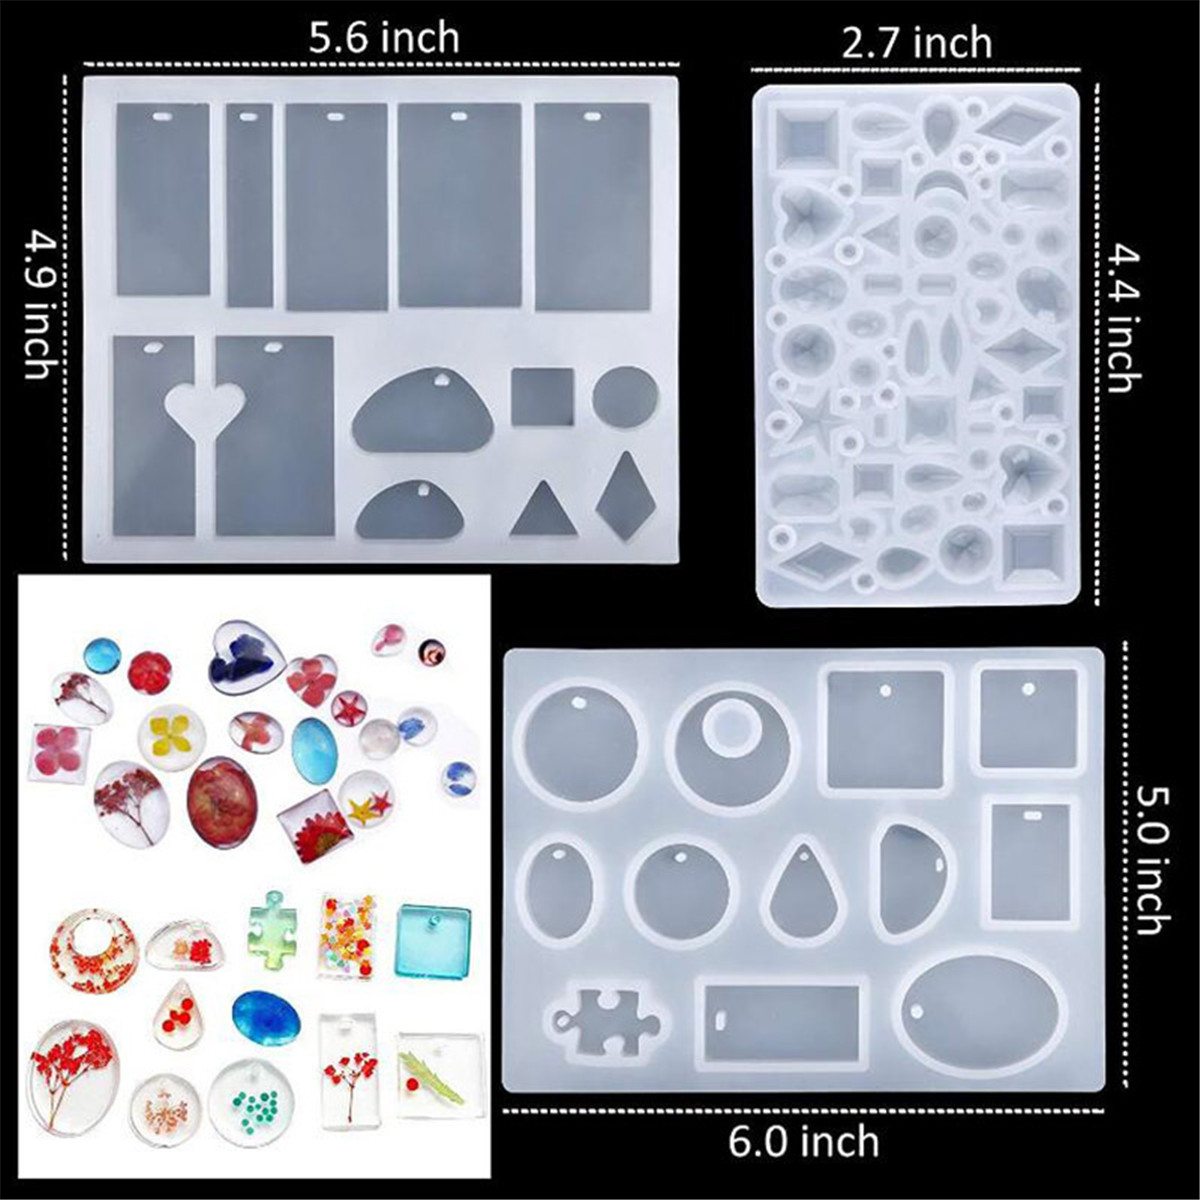 83x-Silicone-Resin-Casting-Mold-Tool-Sets-Kit-DIY-Pendant-Jewelry-Bracelet-Making-1808640-5